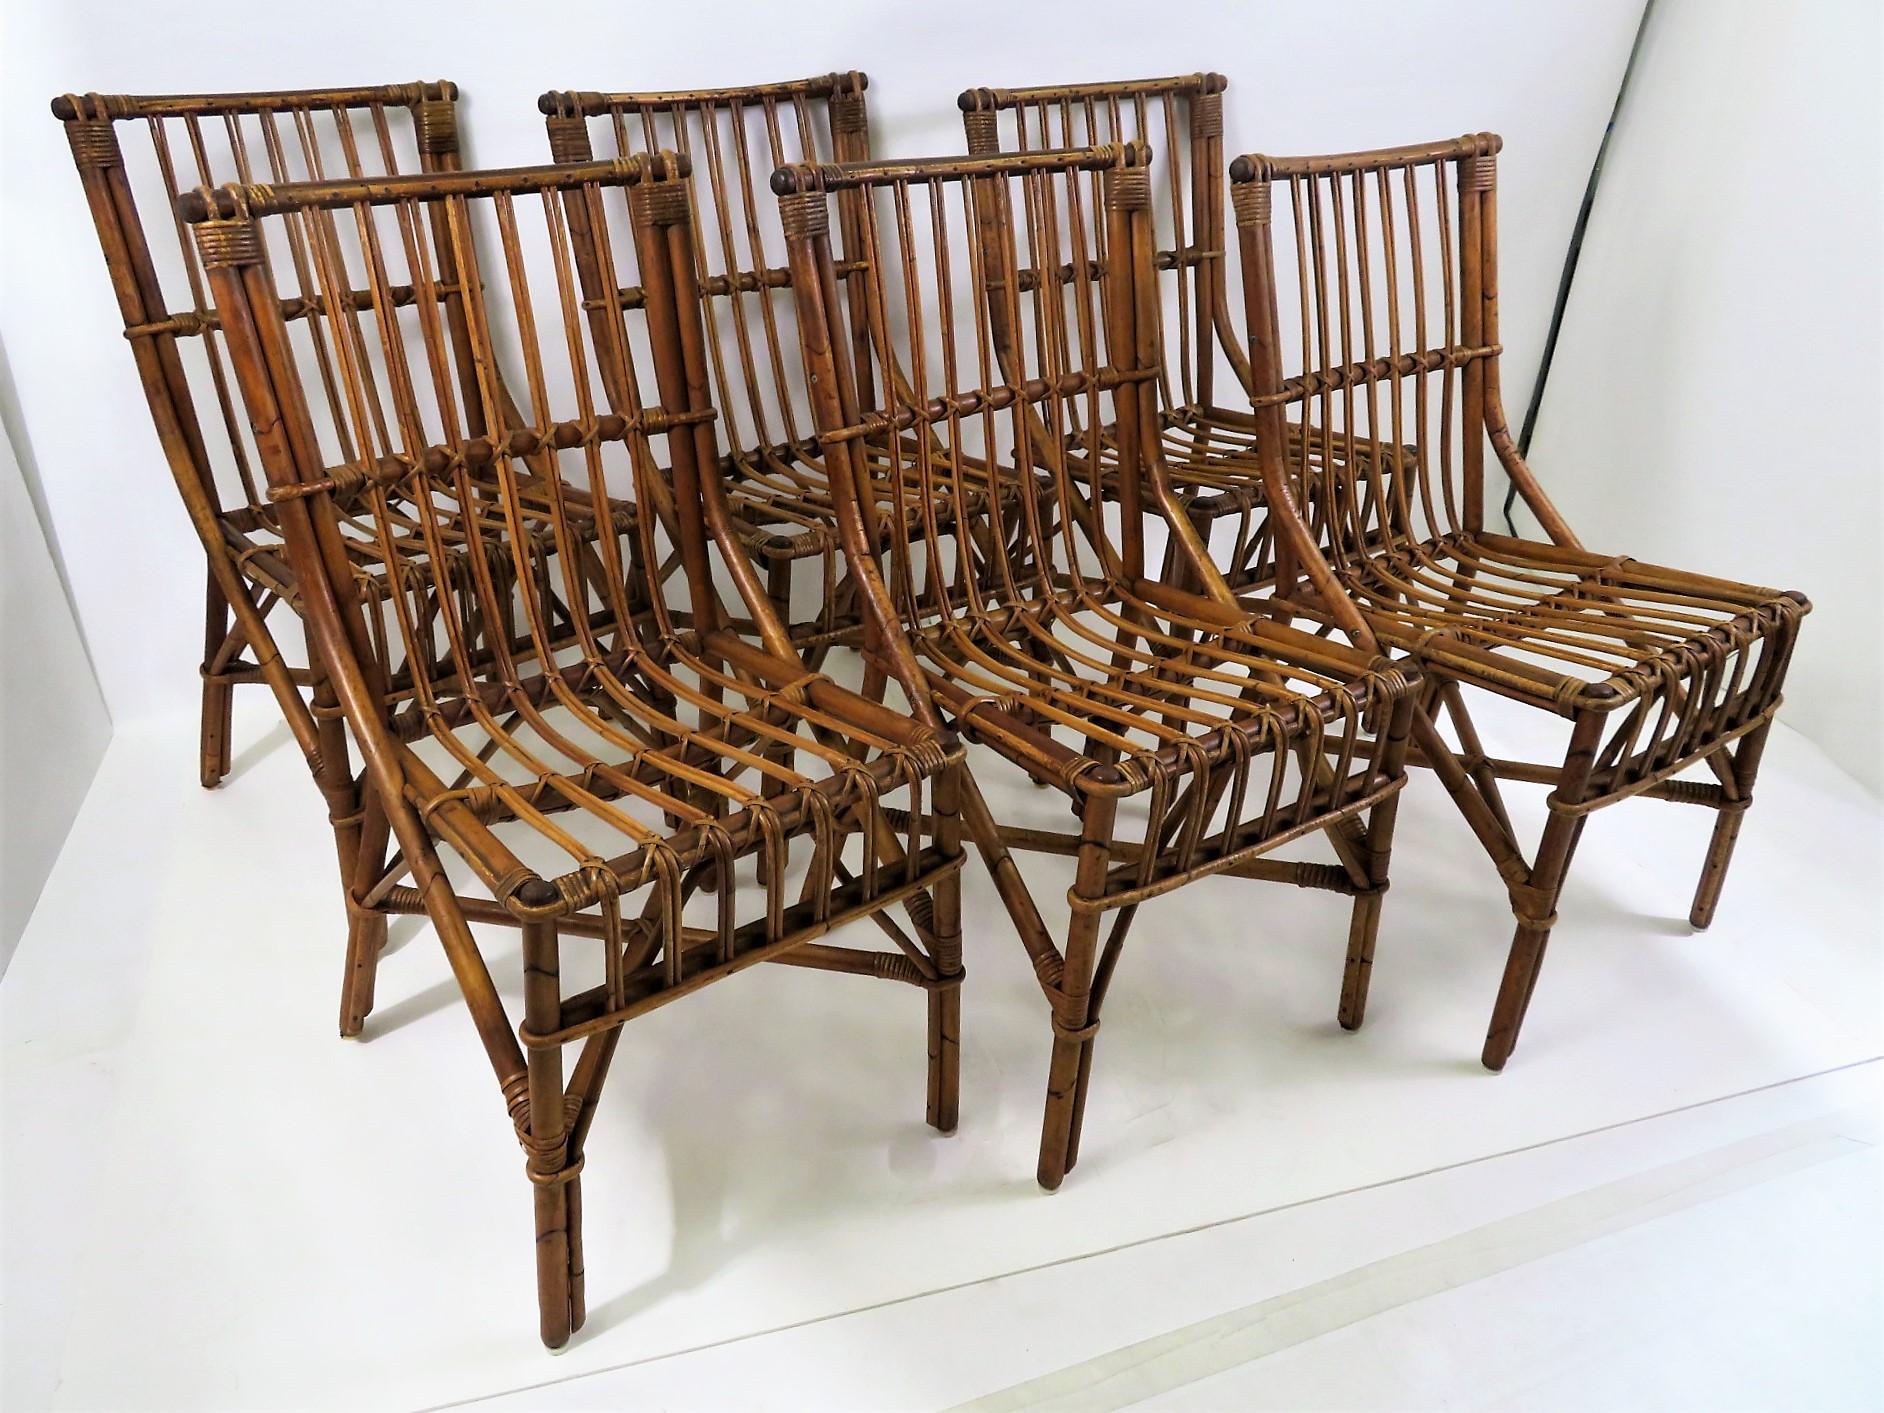 6 Extremely well realized faux Bamboo and Twig (real) dining chairs with exceptional style from the Italian firm Dal Vera. Rustic, with mottled color, they are in fine condition with no losses to any binding. Unmarked as to maker, they are